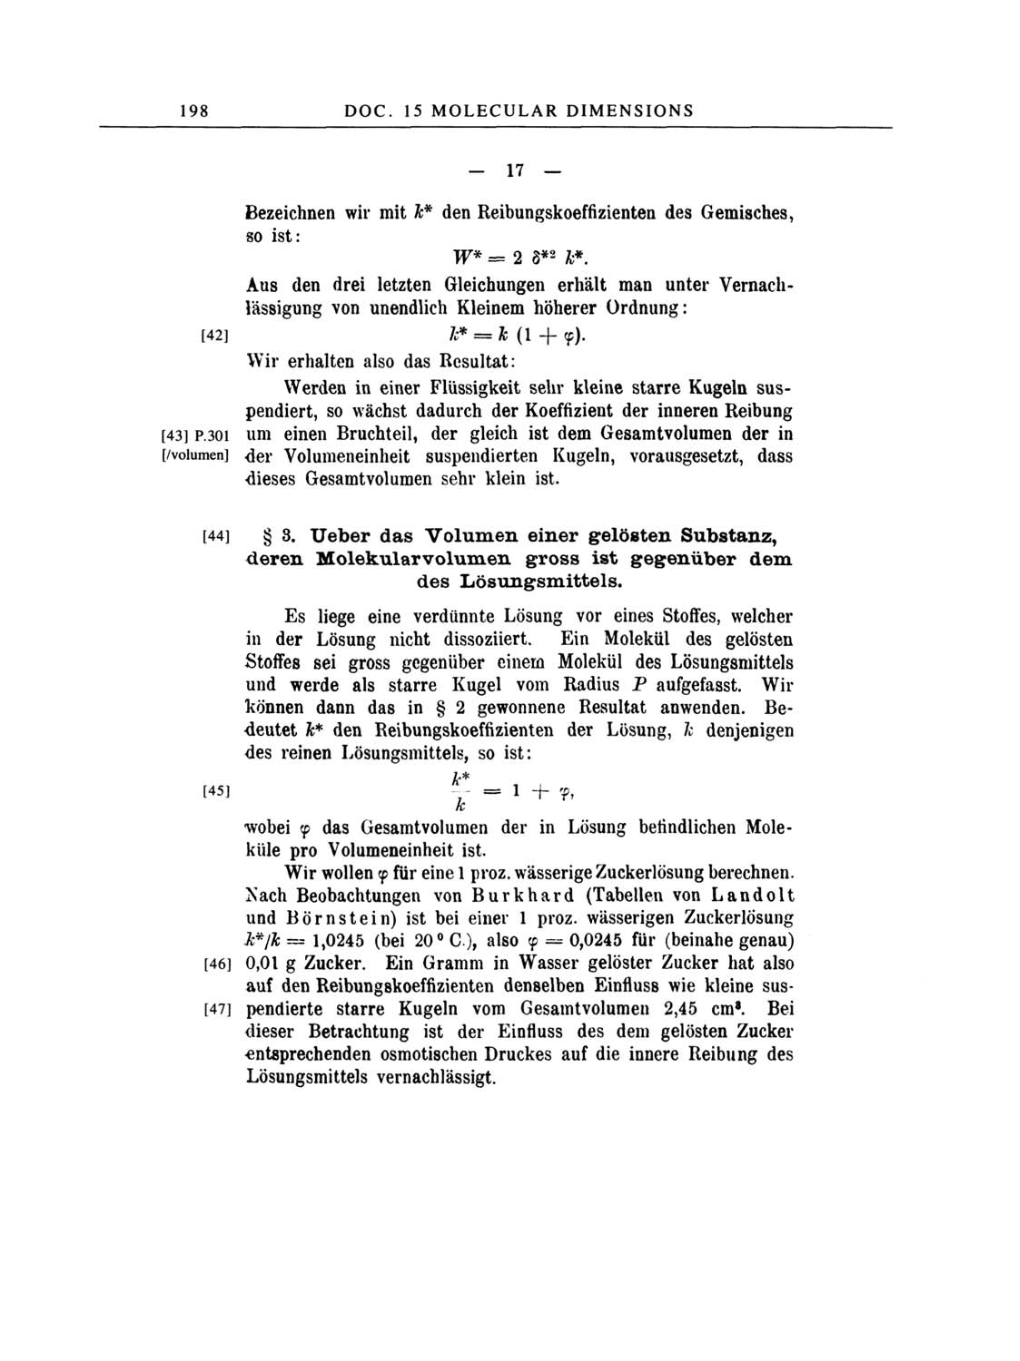 Volume 2: The Swiss Years: Writings, 1900-1909 page 198